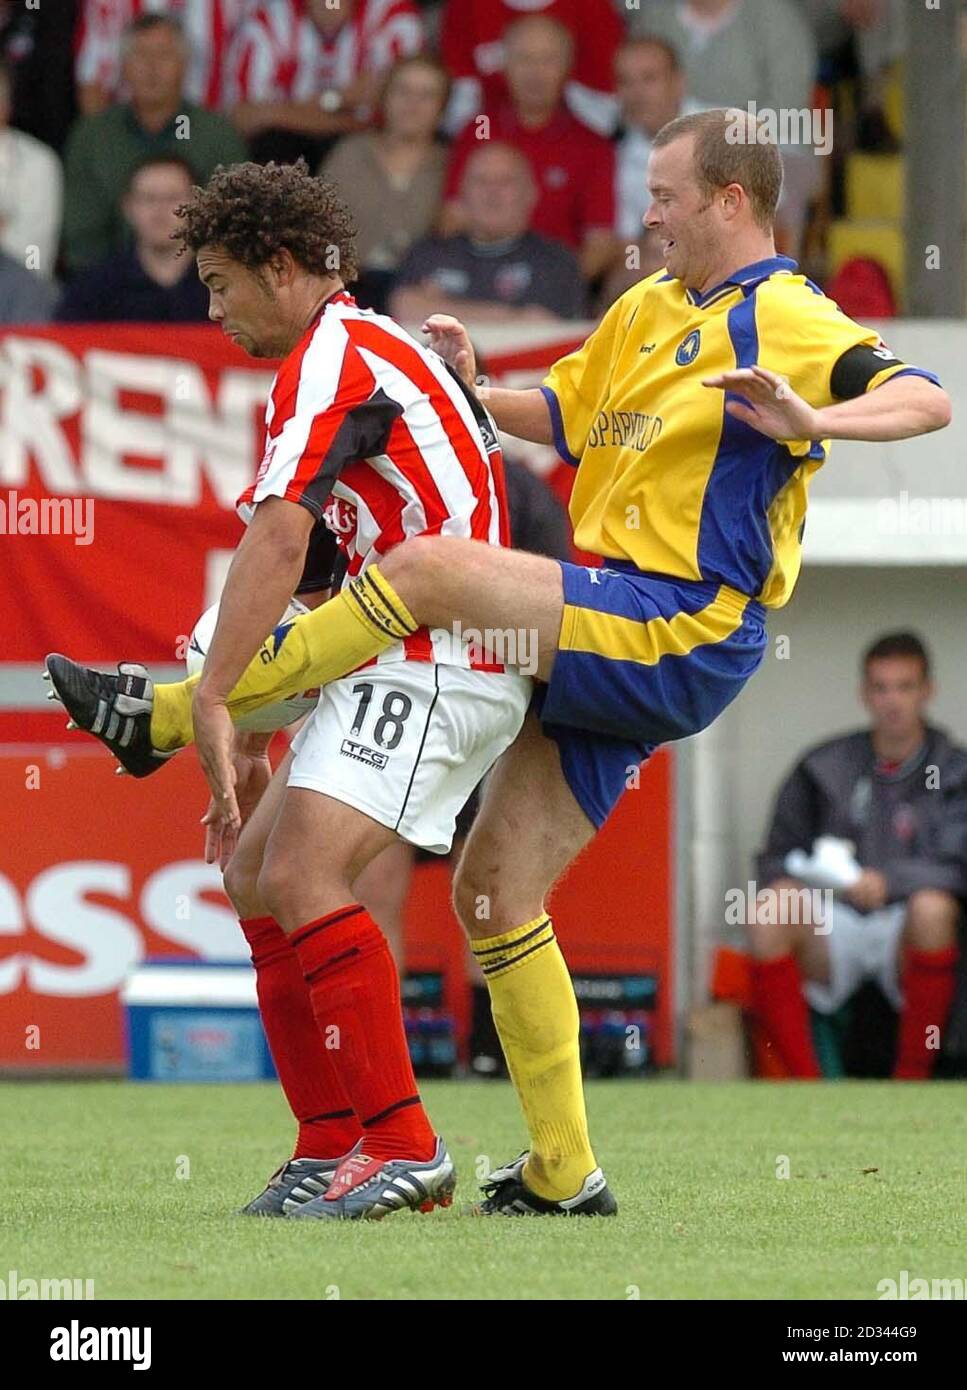 Craig Taylor of Torquay (R) battles with Brentford's Deon Burton during their Coca Cola League One match at Plainmoor, Torquay. Stock Photo